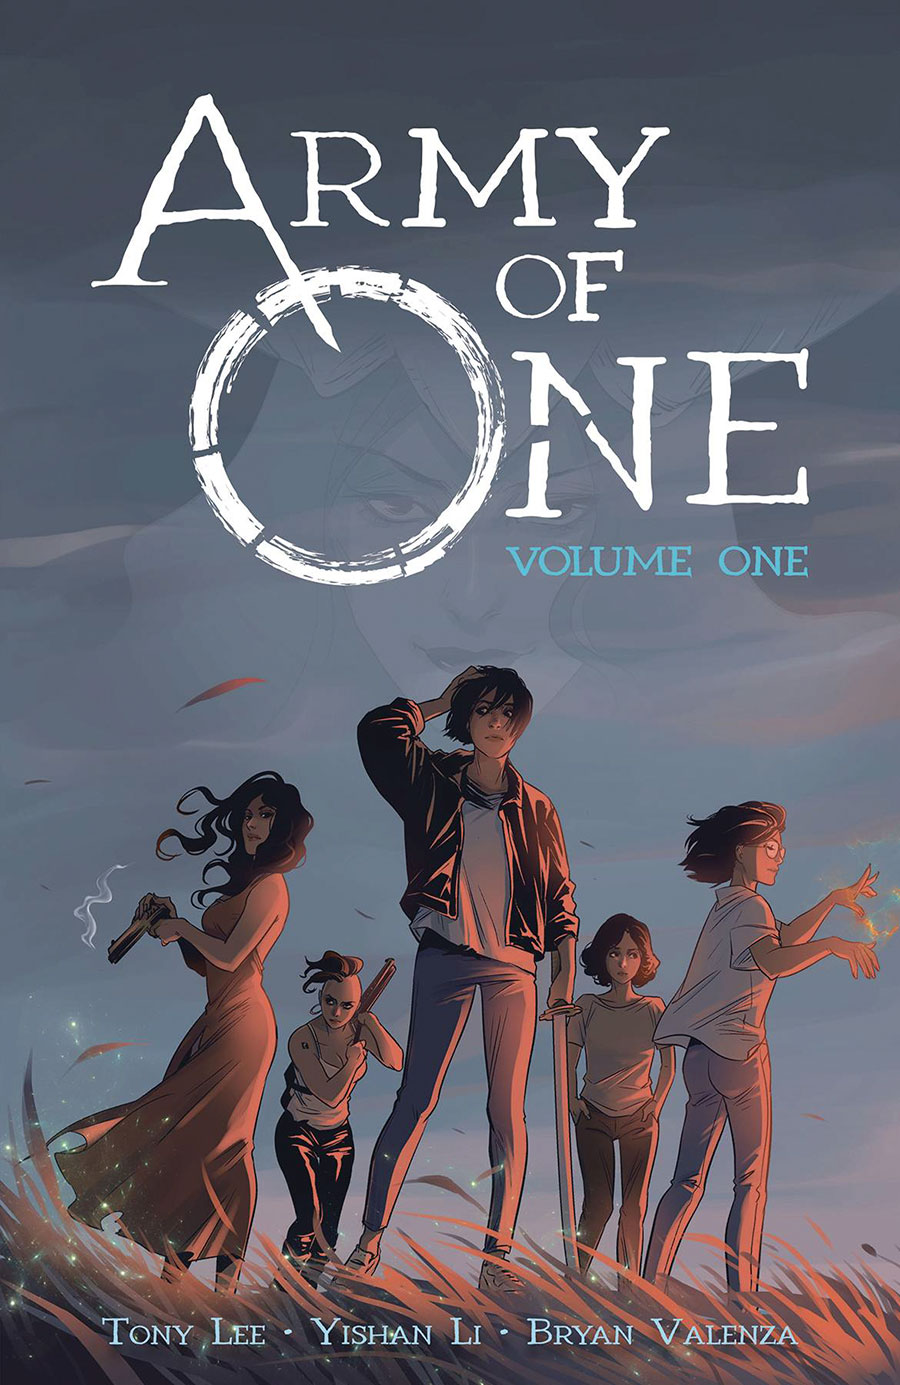 Army Of One Vol 1 TP